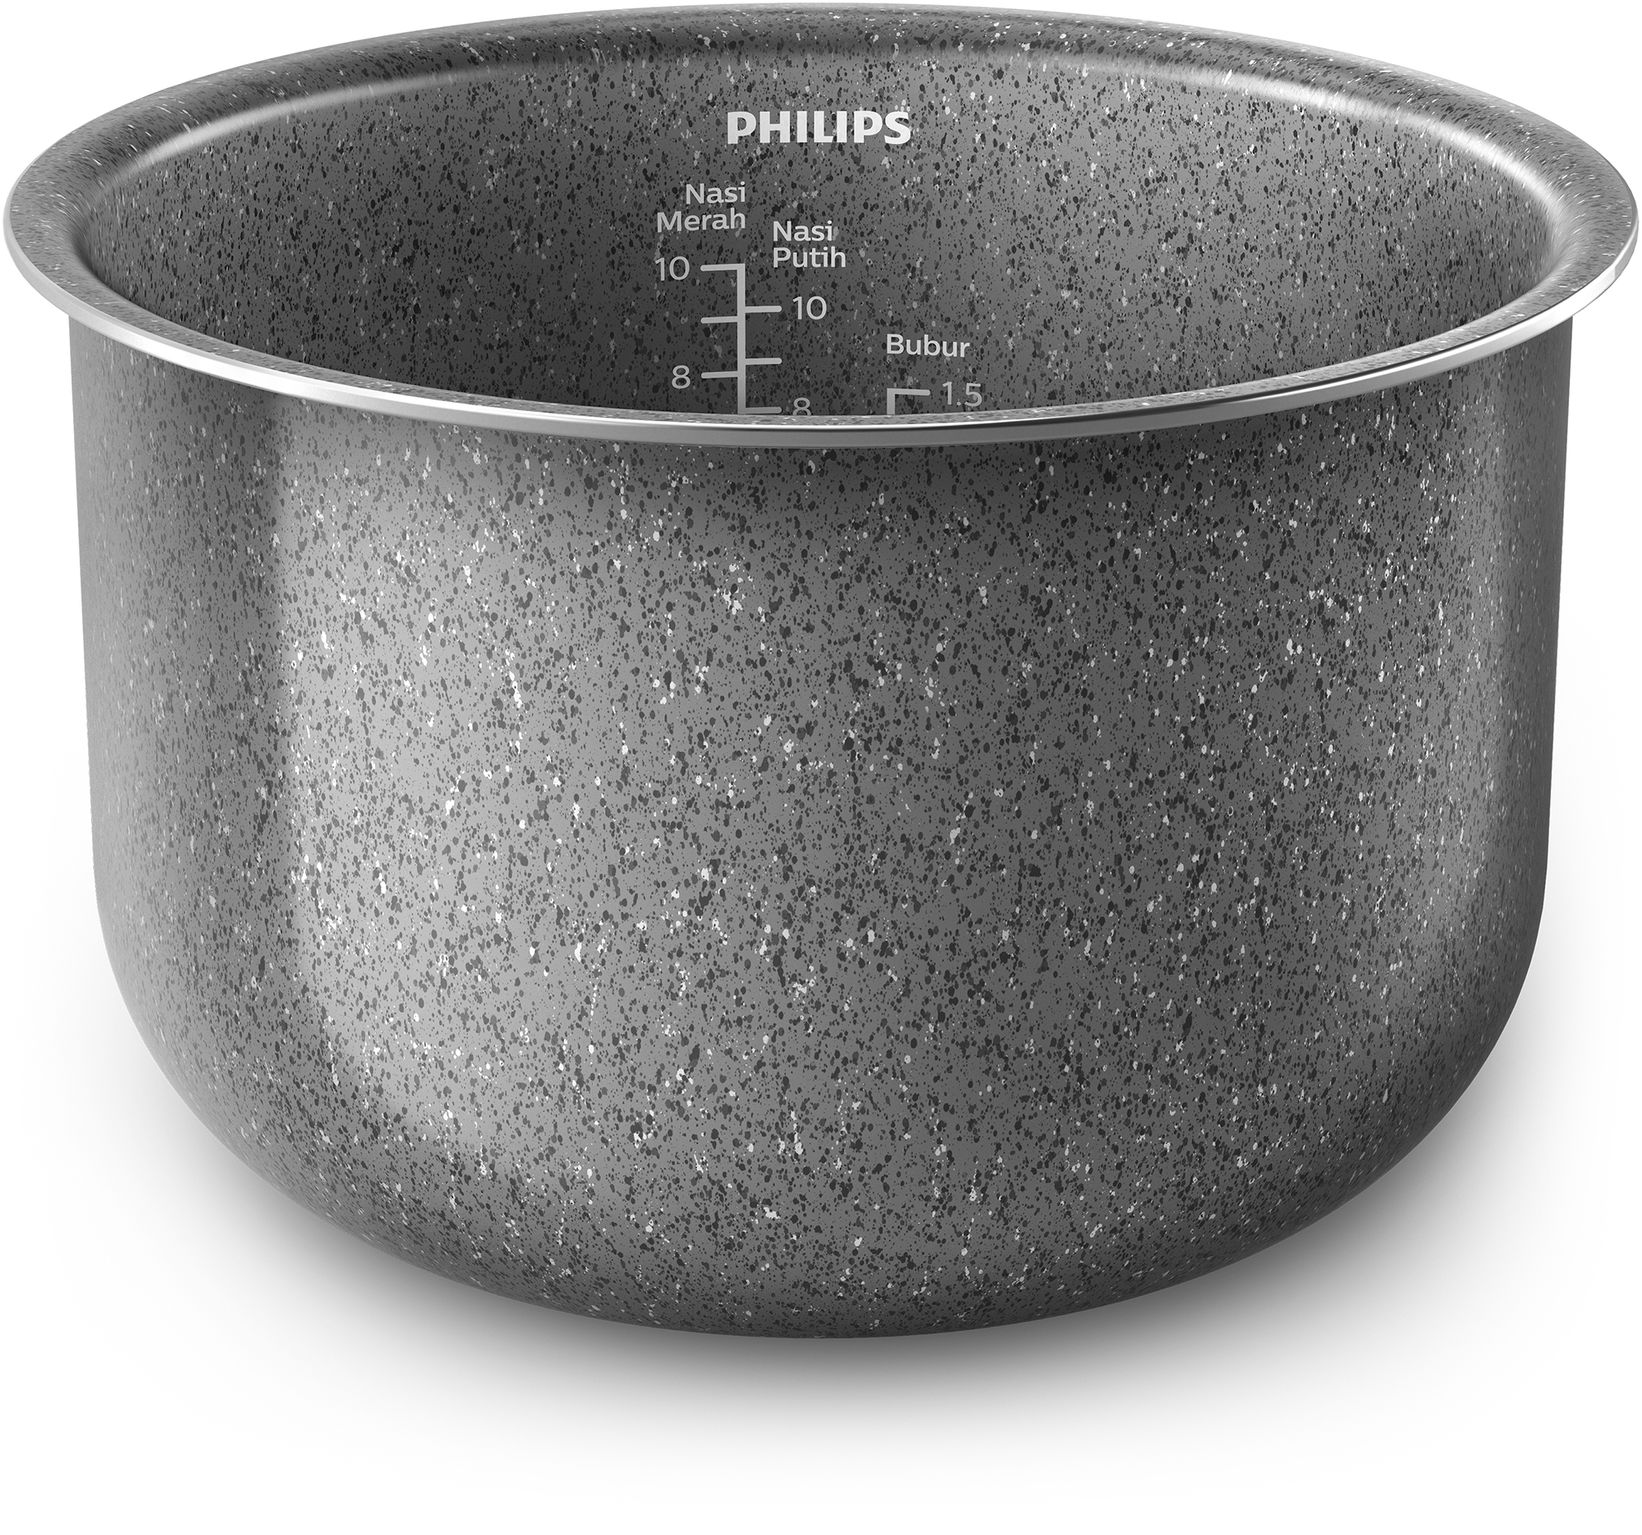 Philips Electric Rice Cooker 5000 Series